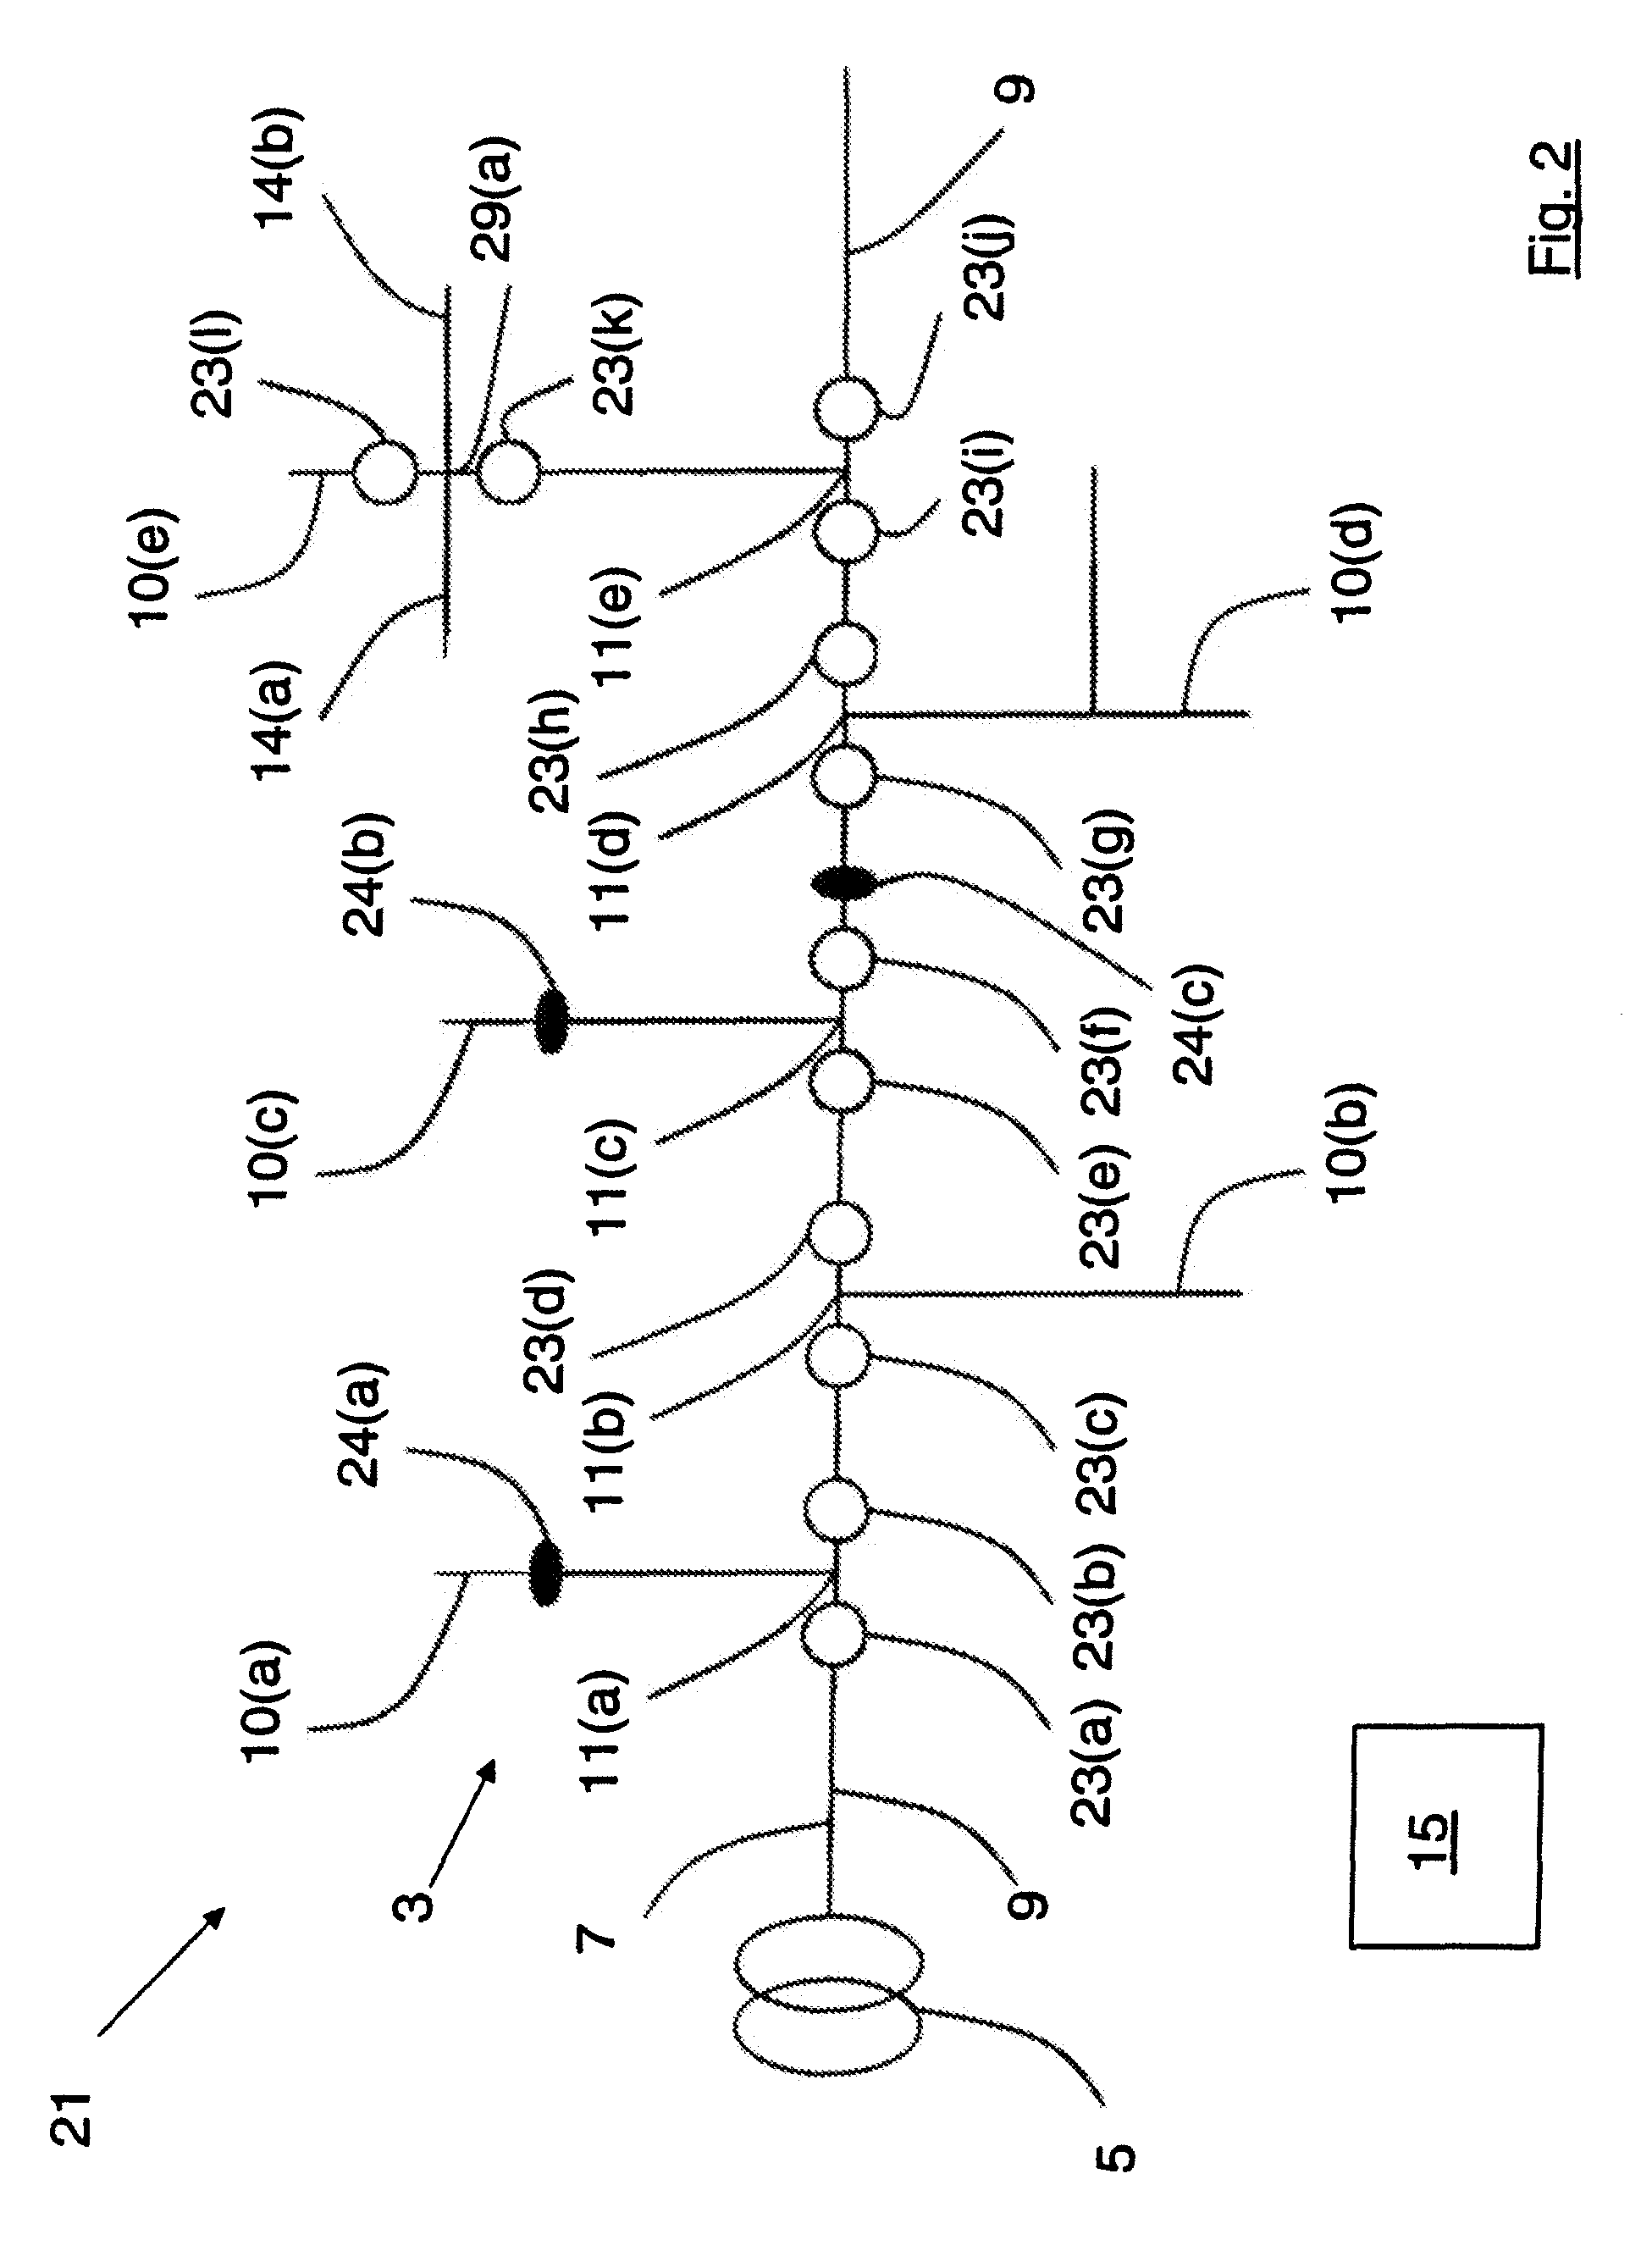 System and method for locating line faults in a medium voltage network